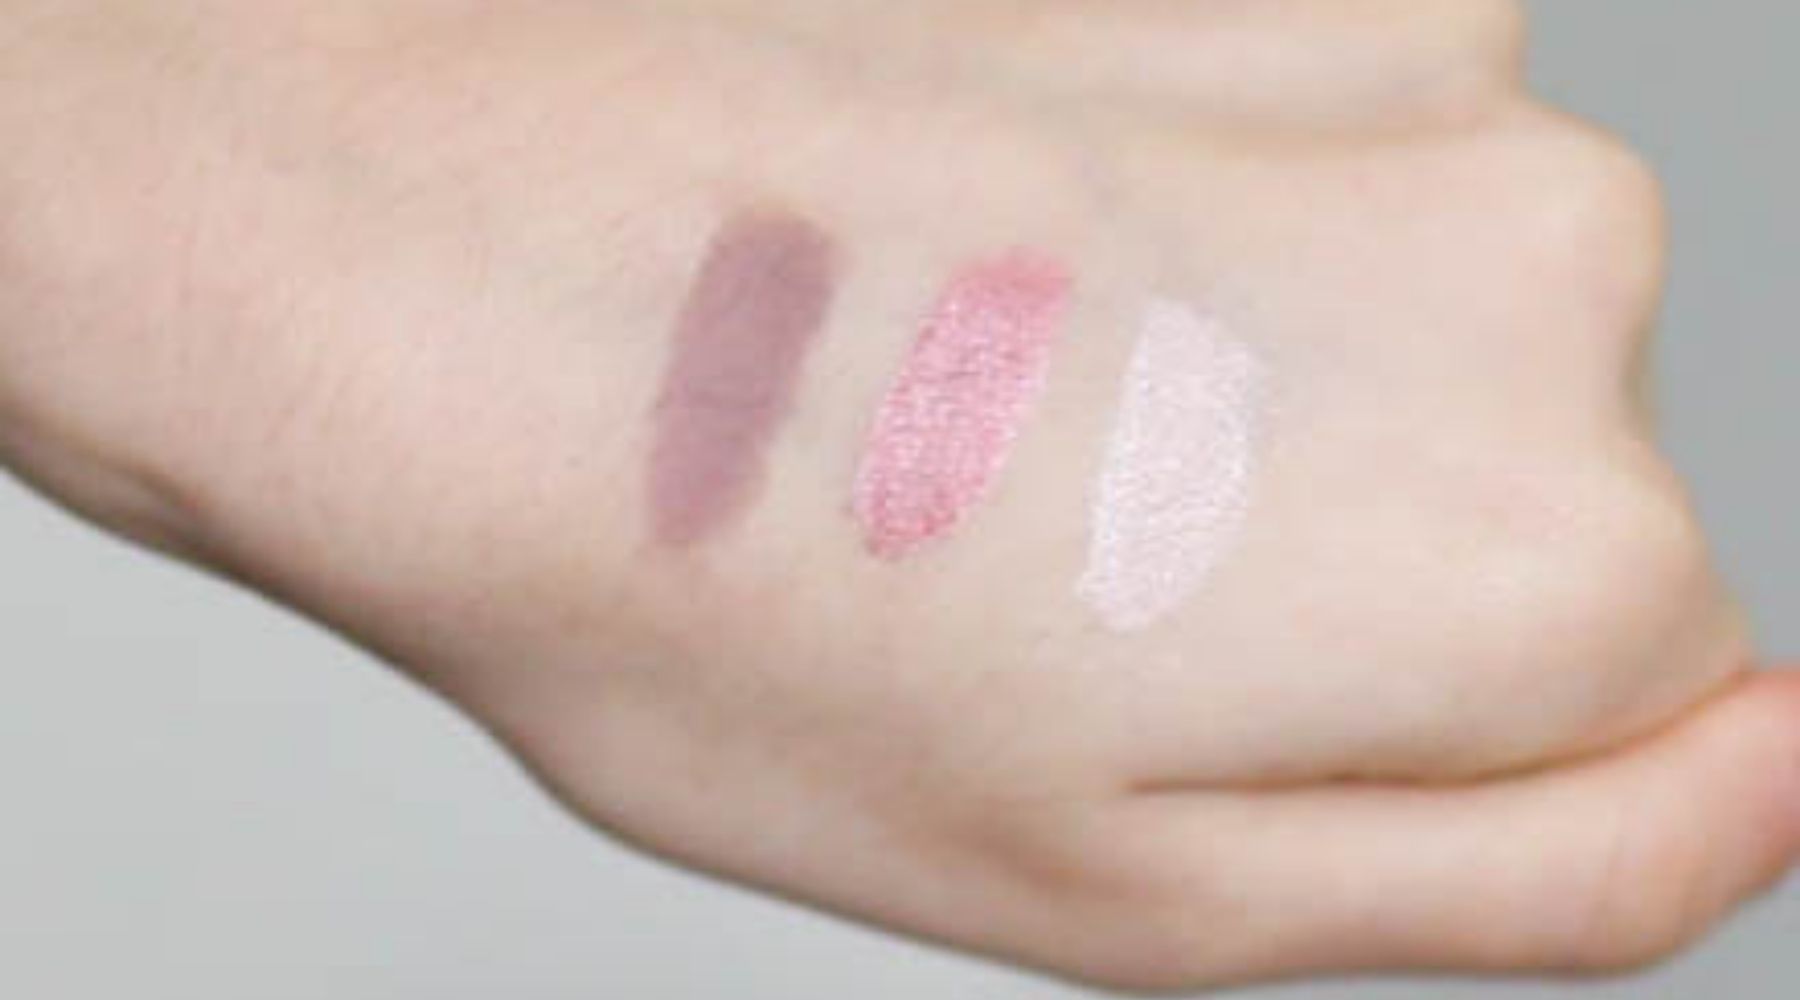 swatch of eyeshadow pigments